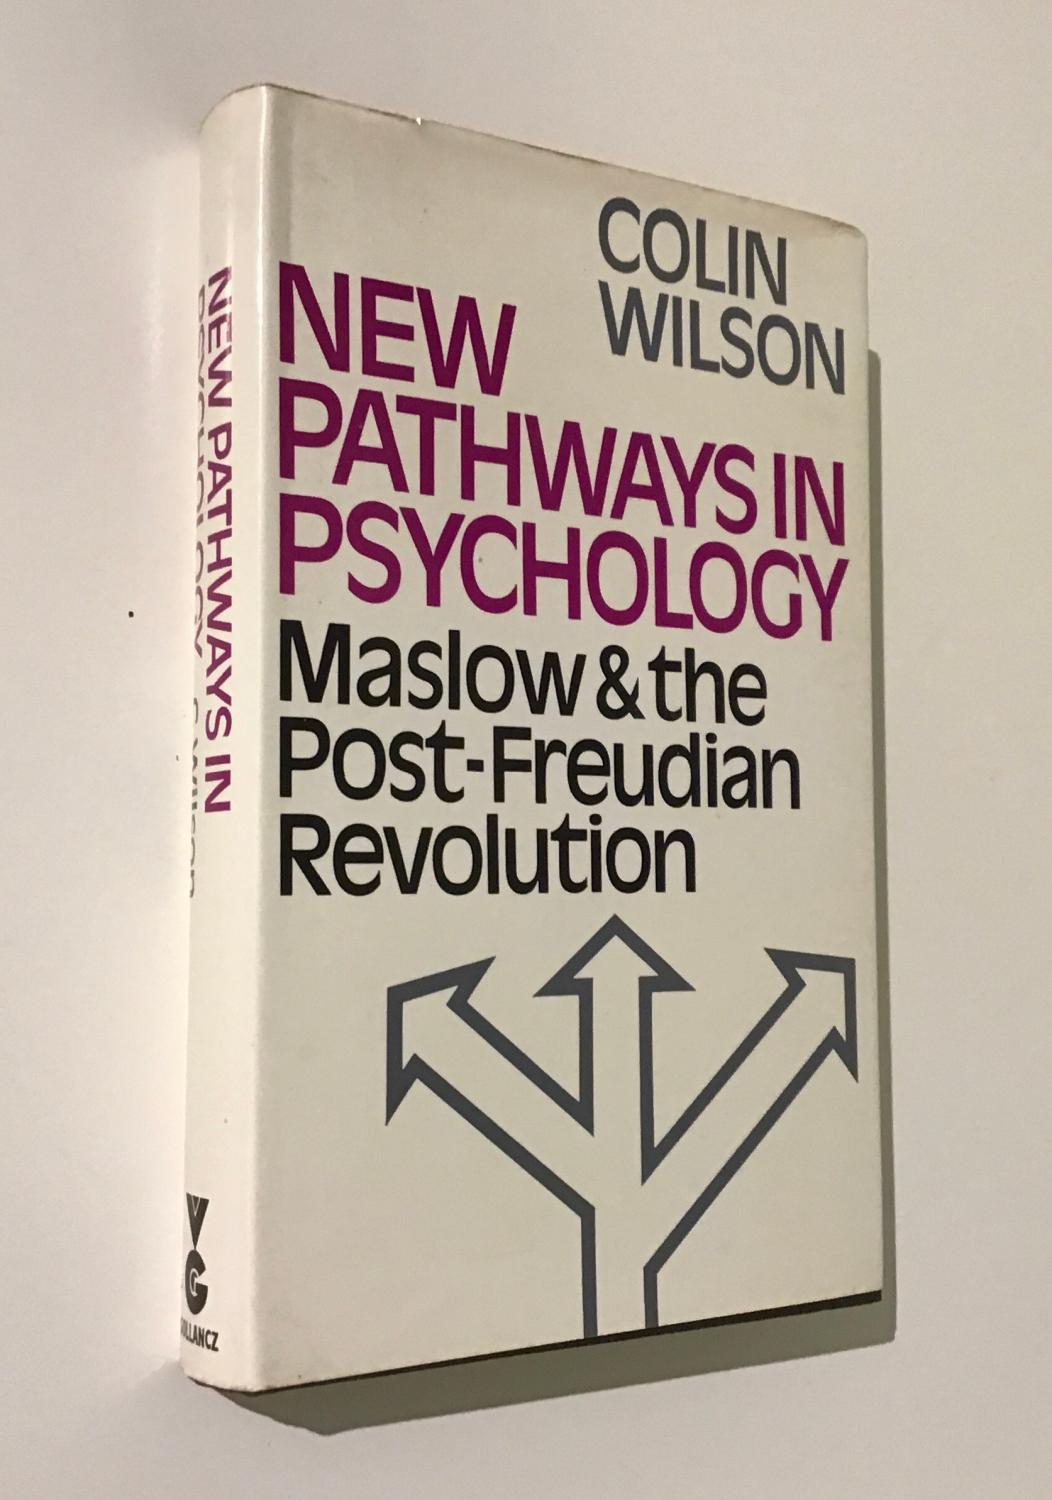 New Pathways in Psychology - Maslow & the Post-Freudian Revolution: Maslow and the Post-Freudian Revolution